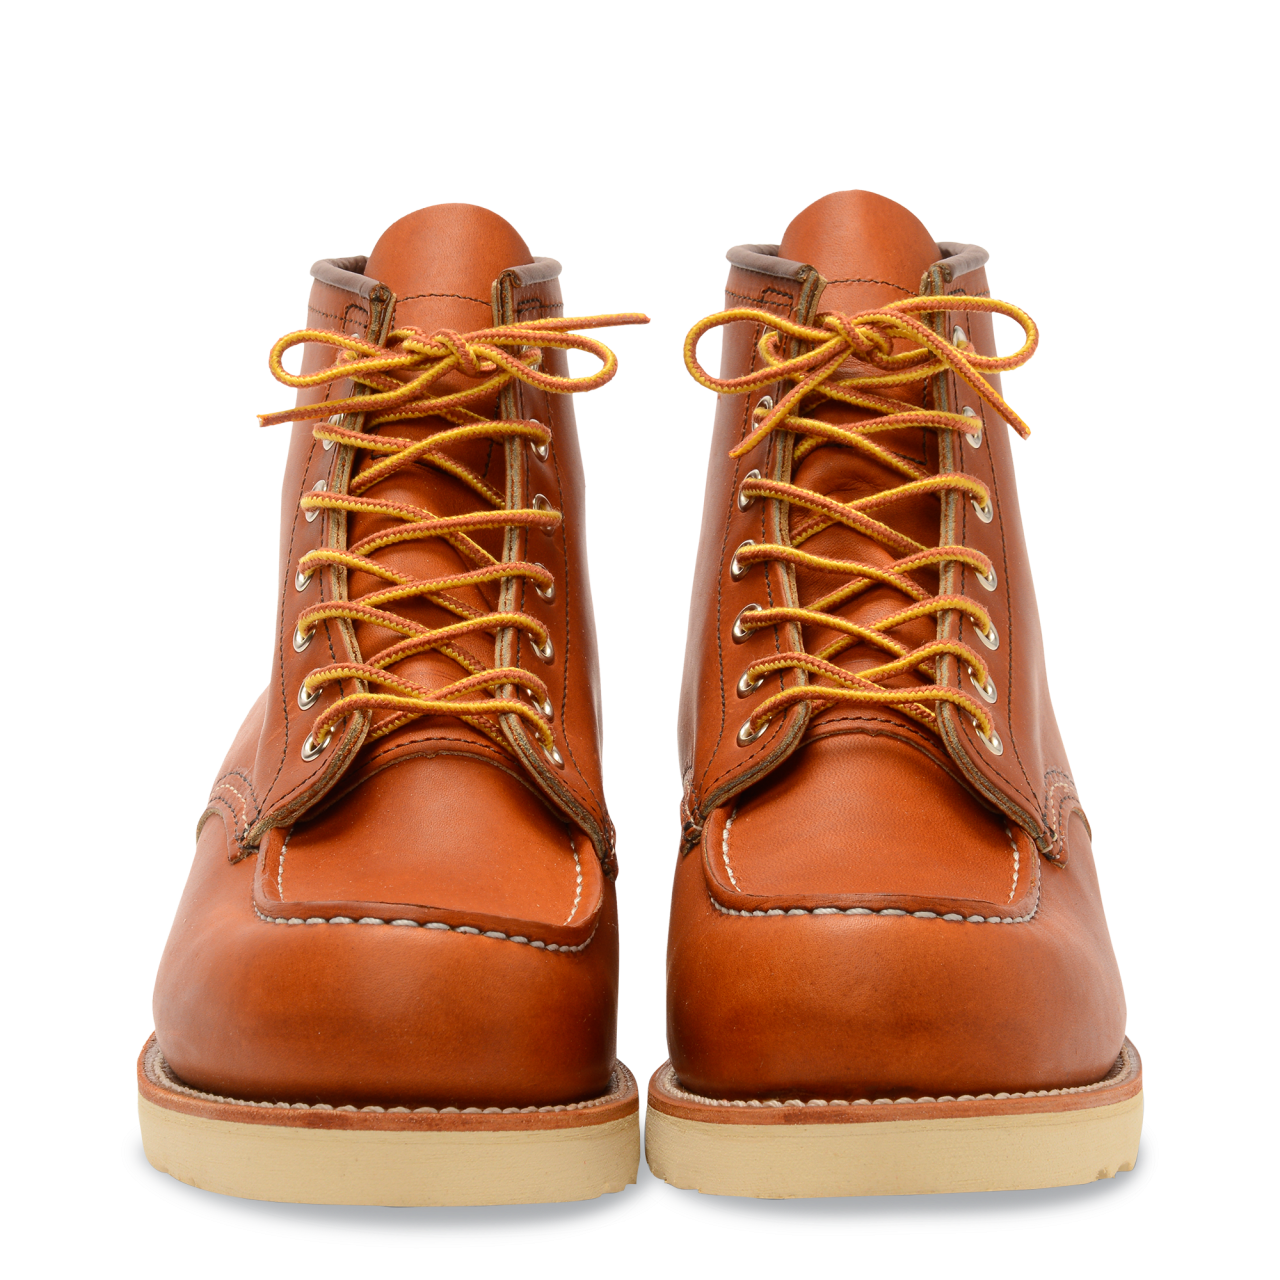 Red Wing 875 D Moc Toe